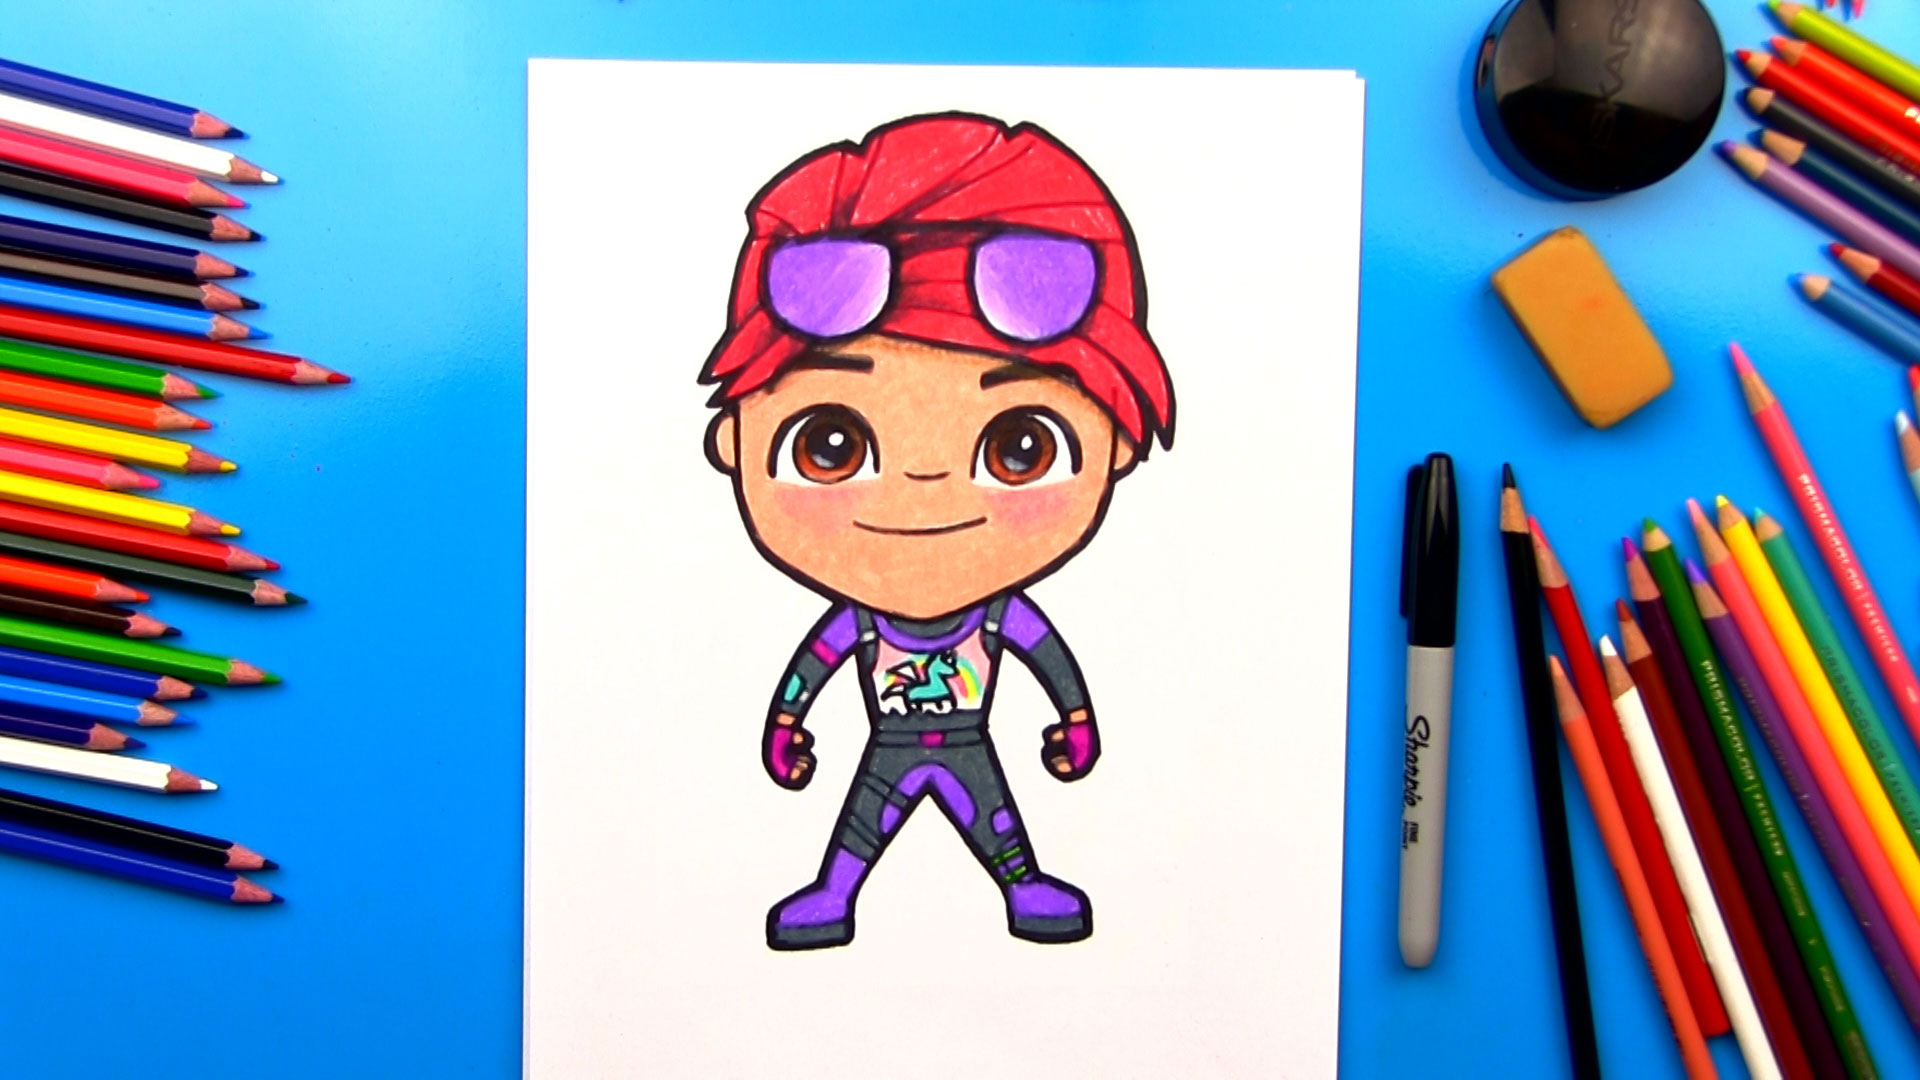 How To Draw Brite Bomber From Fortnite Art For Kids Hub - 